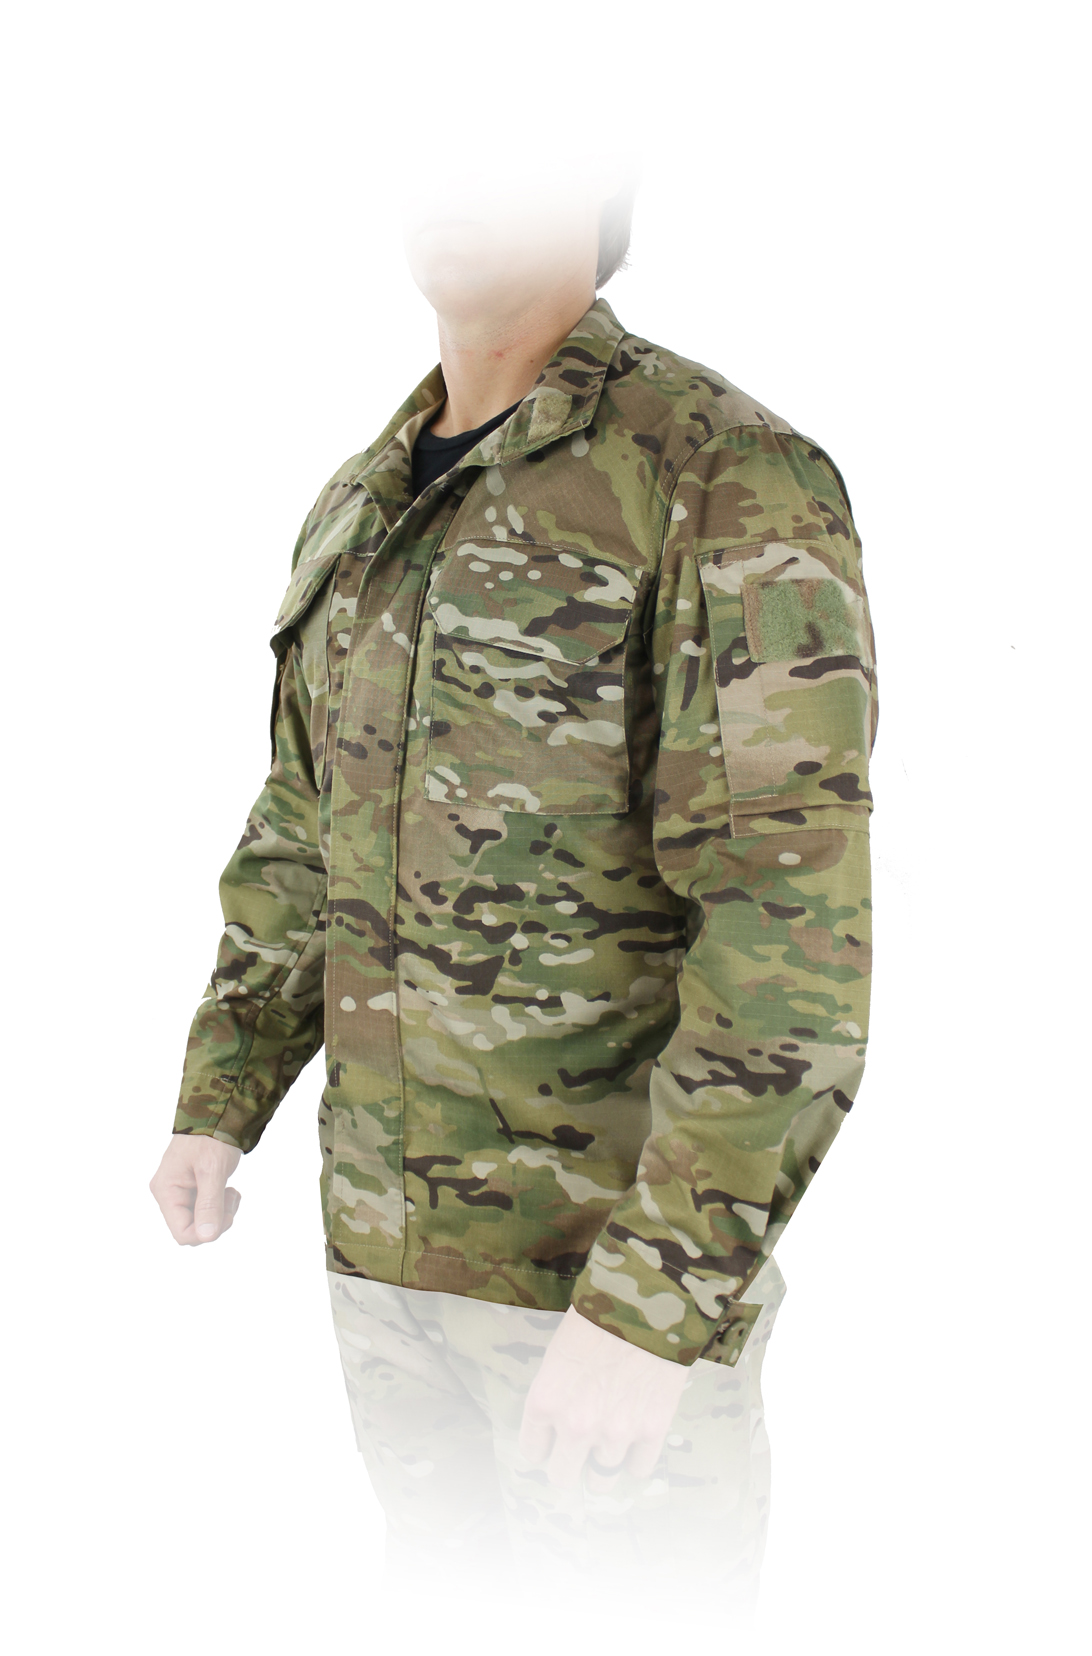 TYR Tactical Offers Tactical Gear And Equipment To Enhance The Performance  Of The Modern Day Soldier